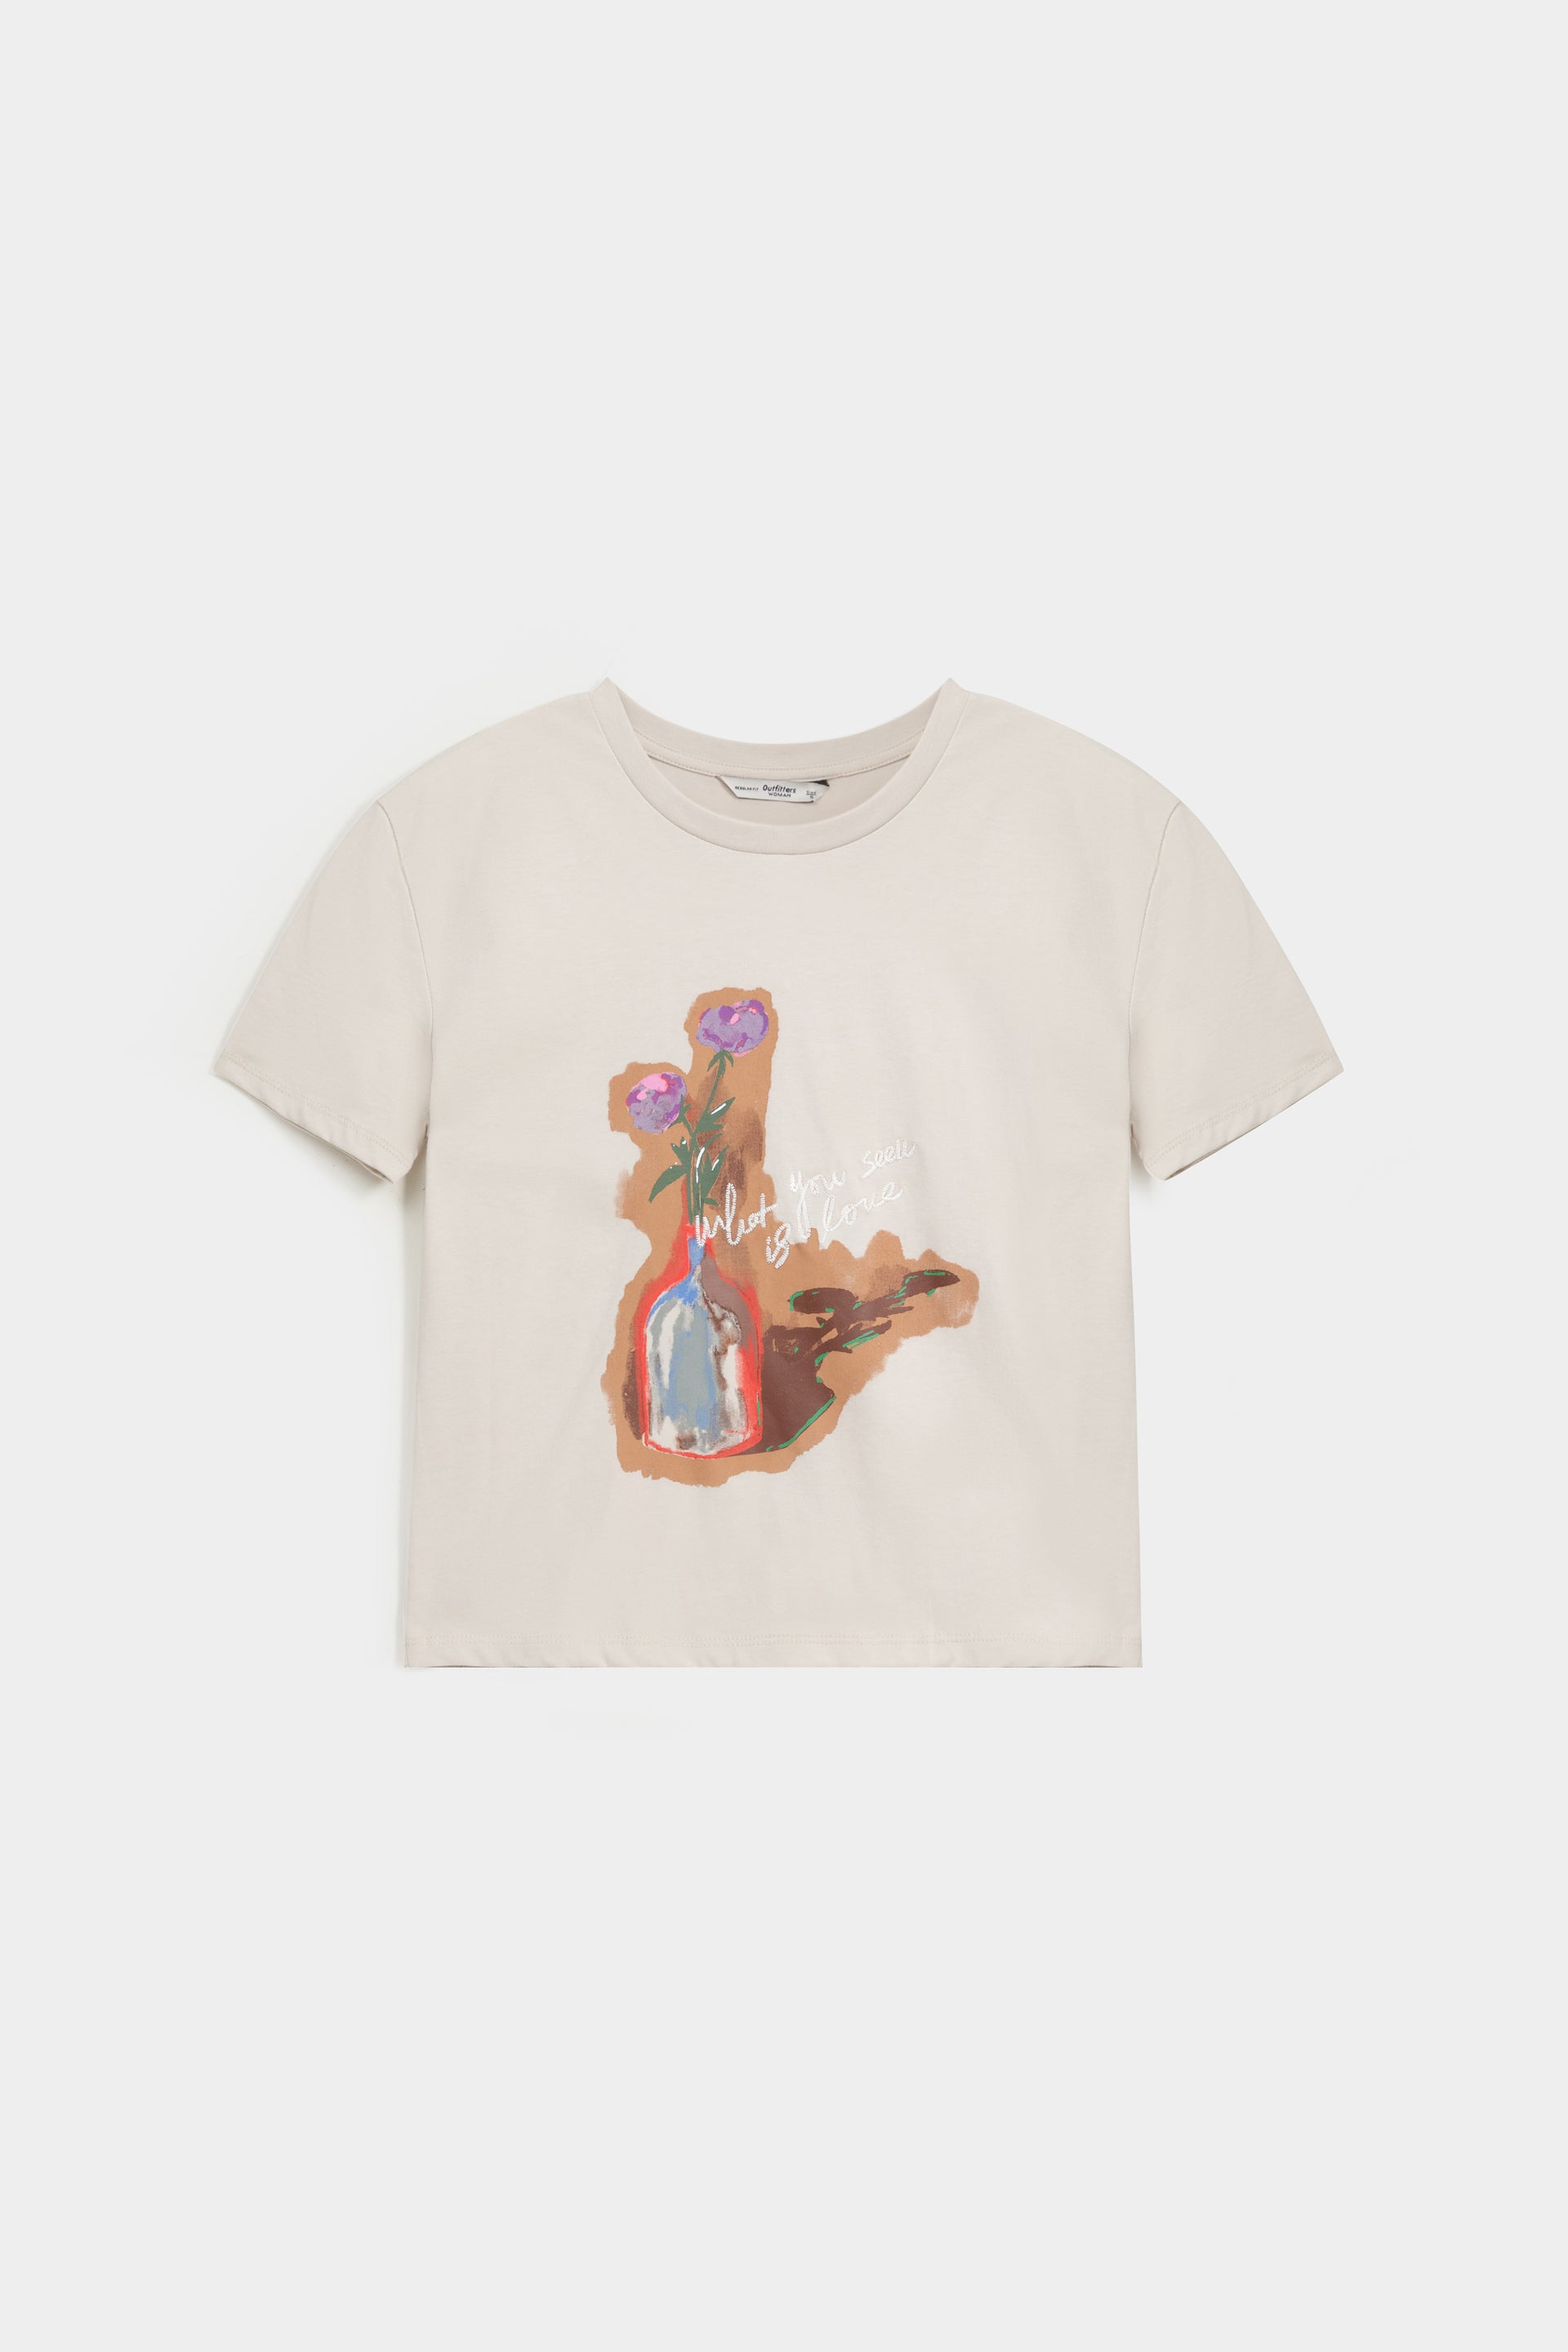 Art Embroidered Graphic T-shirt- HUES OF NATURE